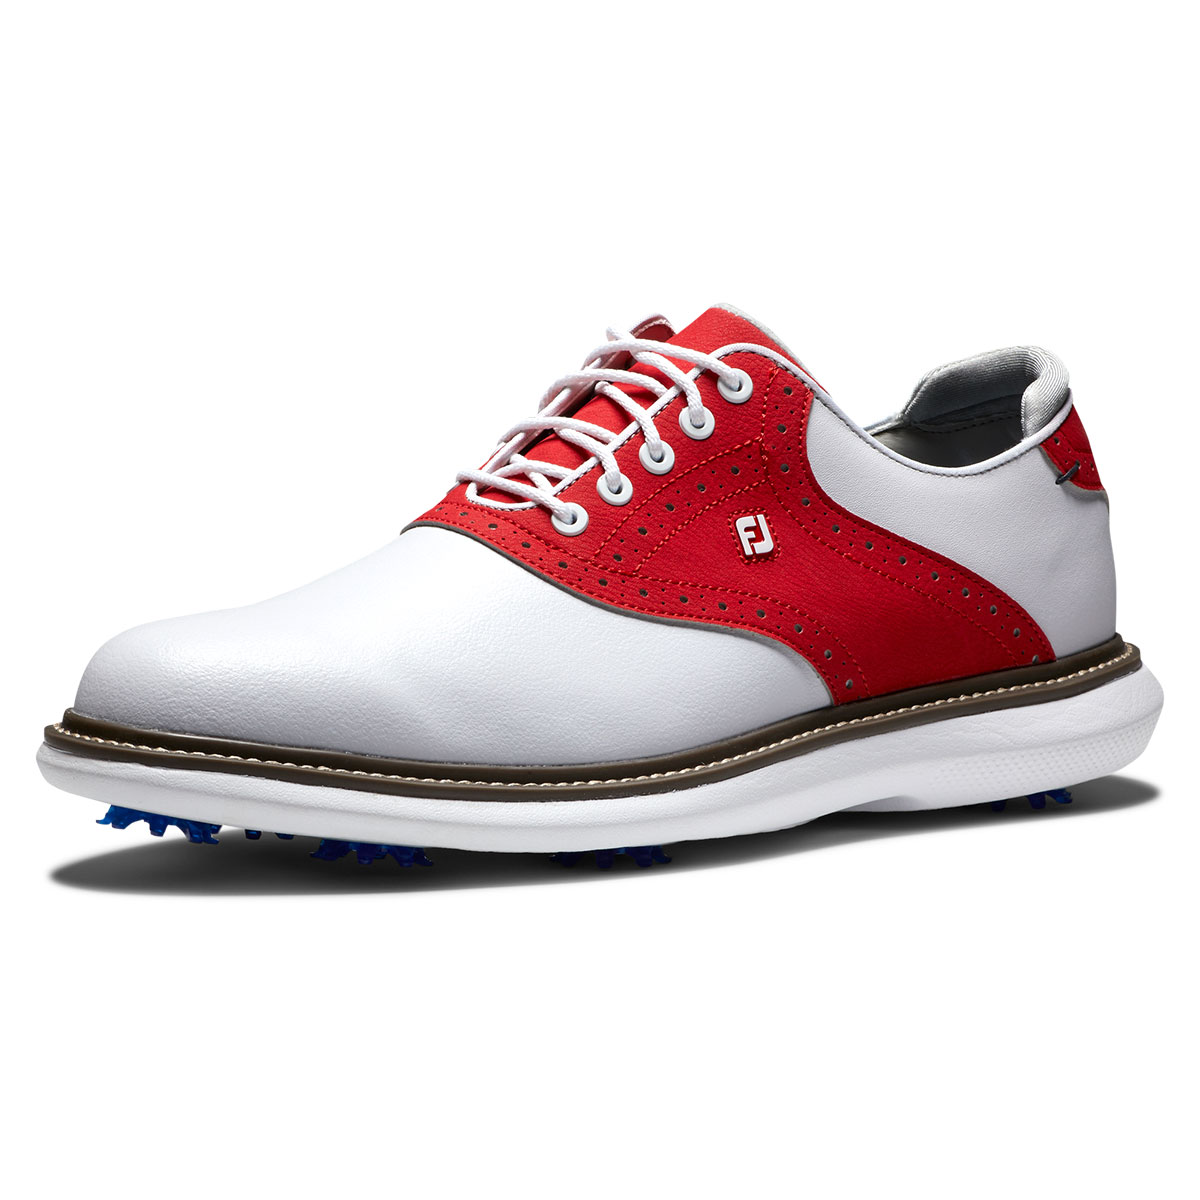 FootJoy Traditions Limited Edition Shoes from american golf